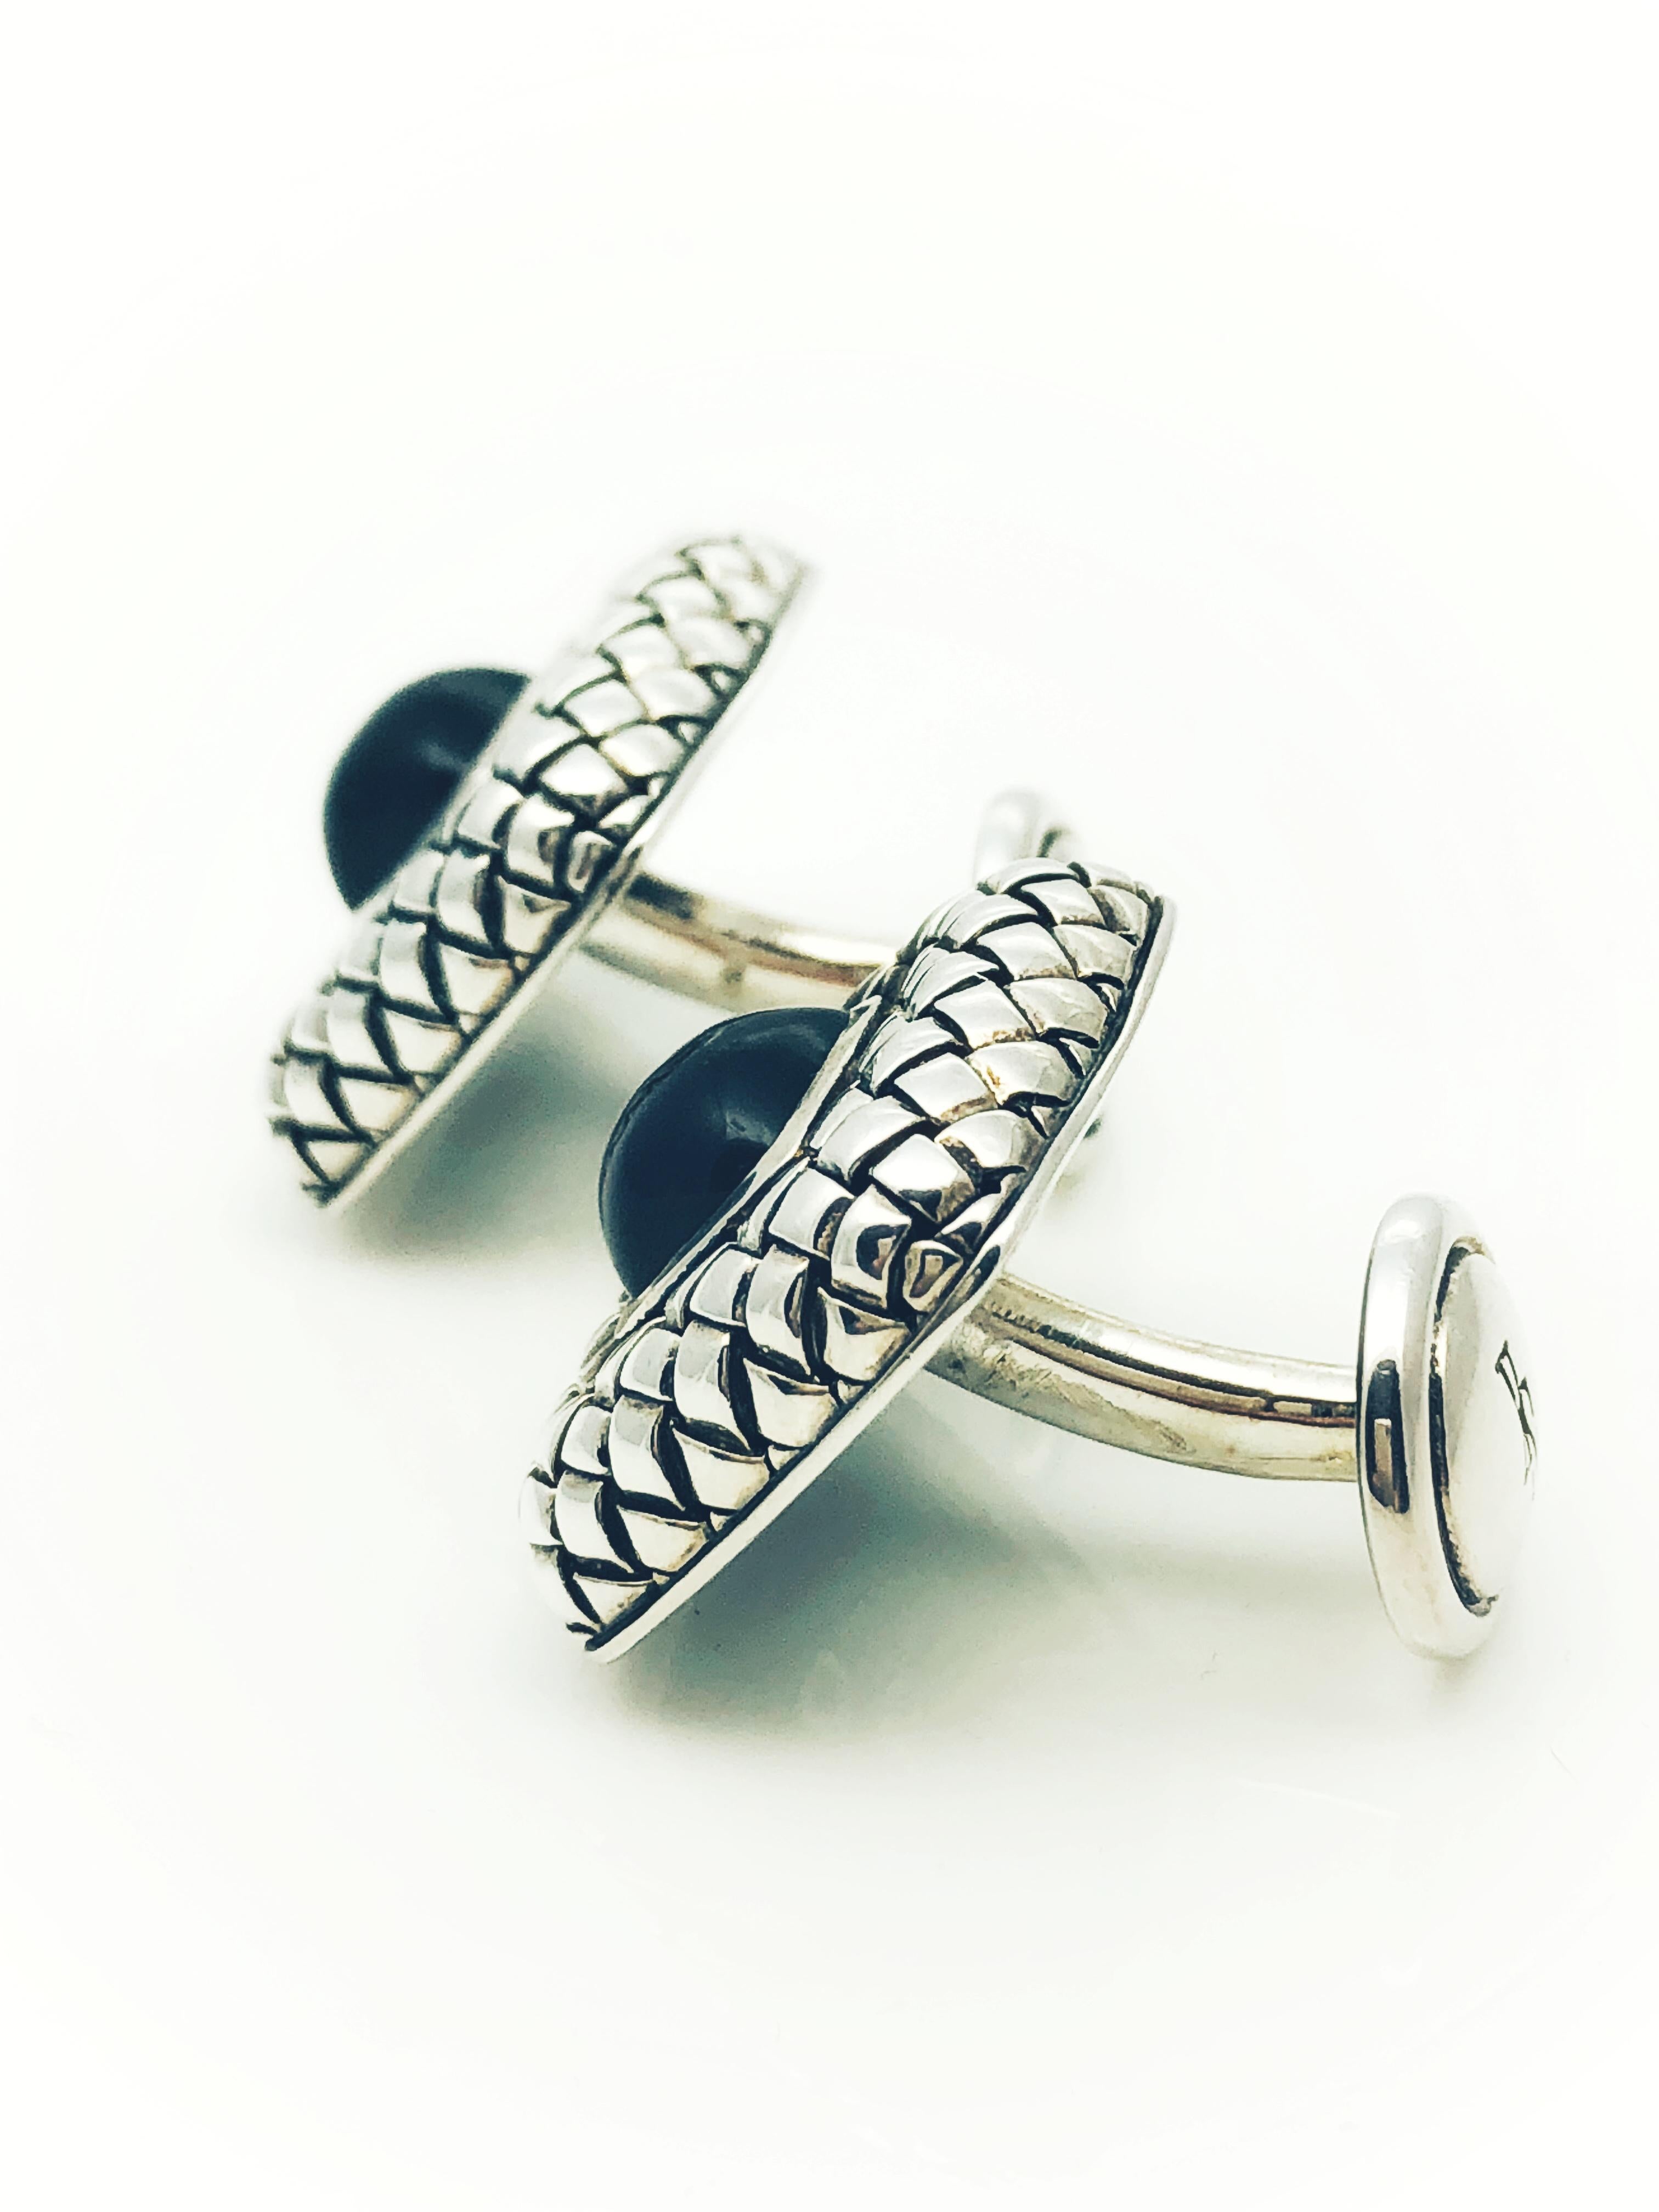 This is a gorgeous set of Scott Kay Cufflinks. They are made in sterling silver and have a smooth, rounded onyx stone at the center. The silver is in the signature Scott Kay basket weave style. The cufflinks measure 3/4 inch square and weigh 31.1